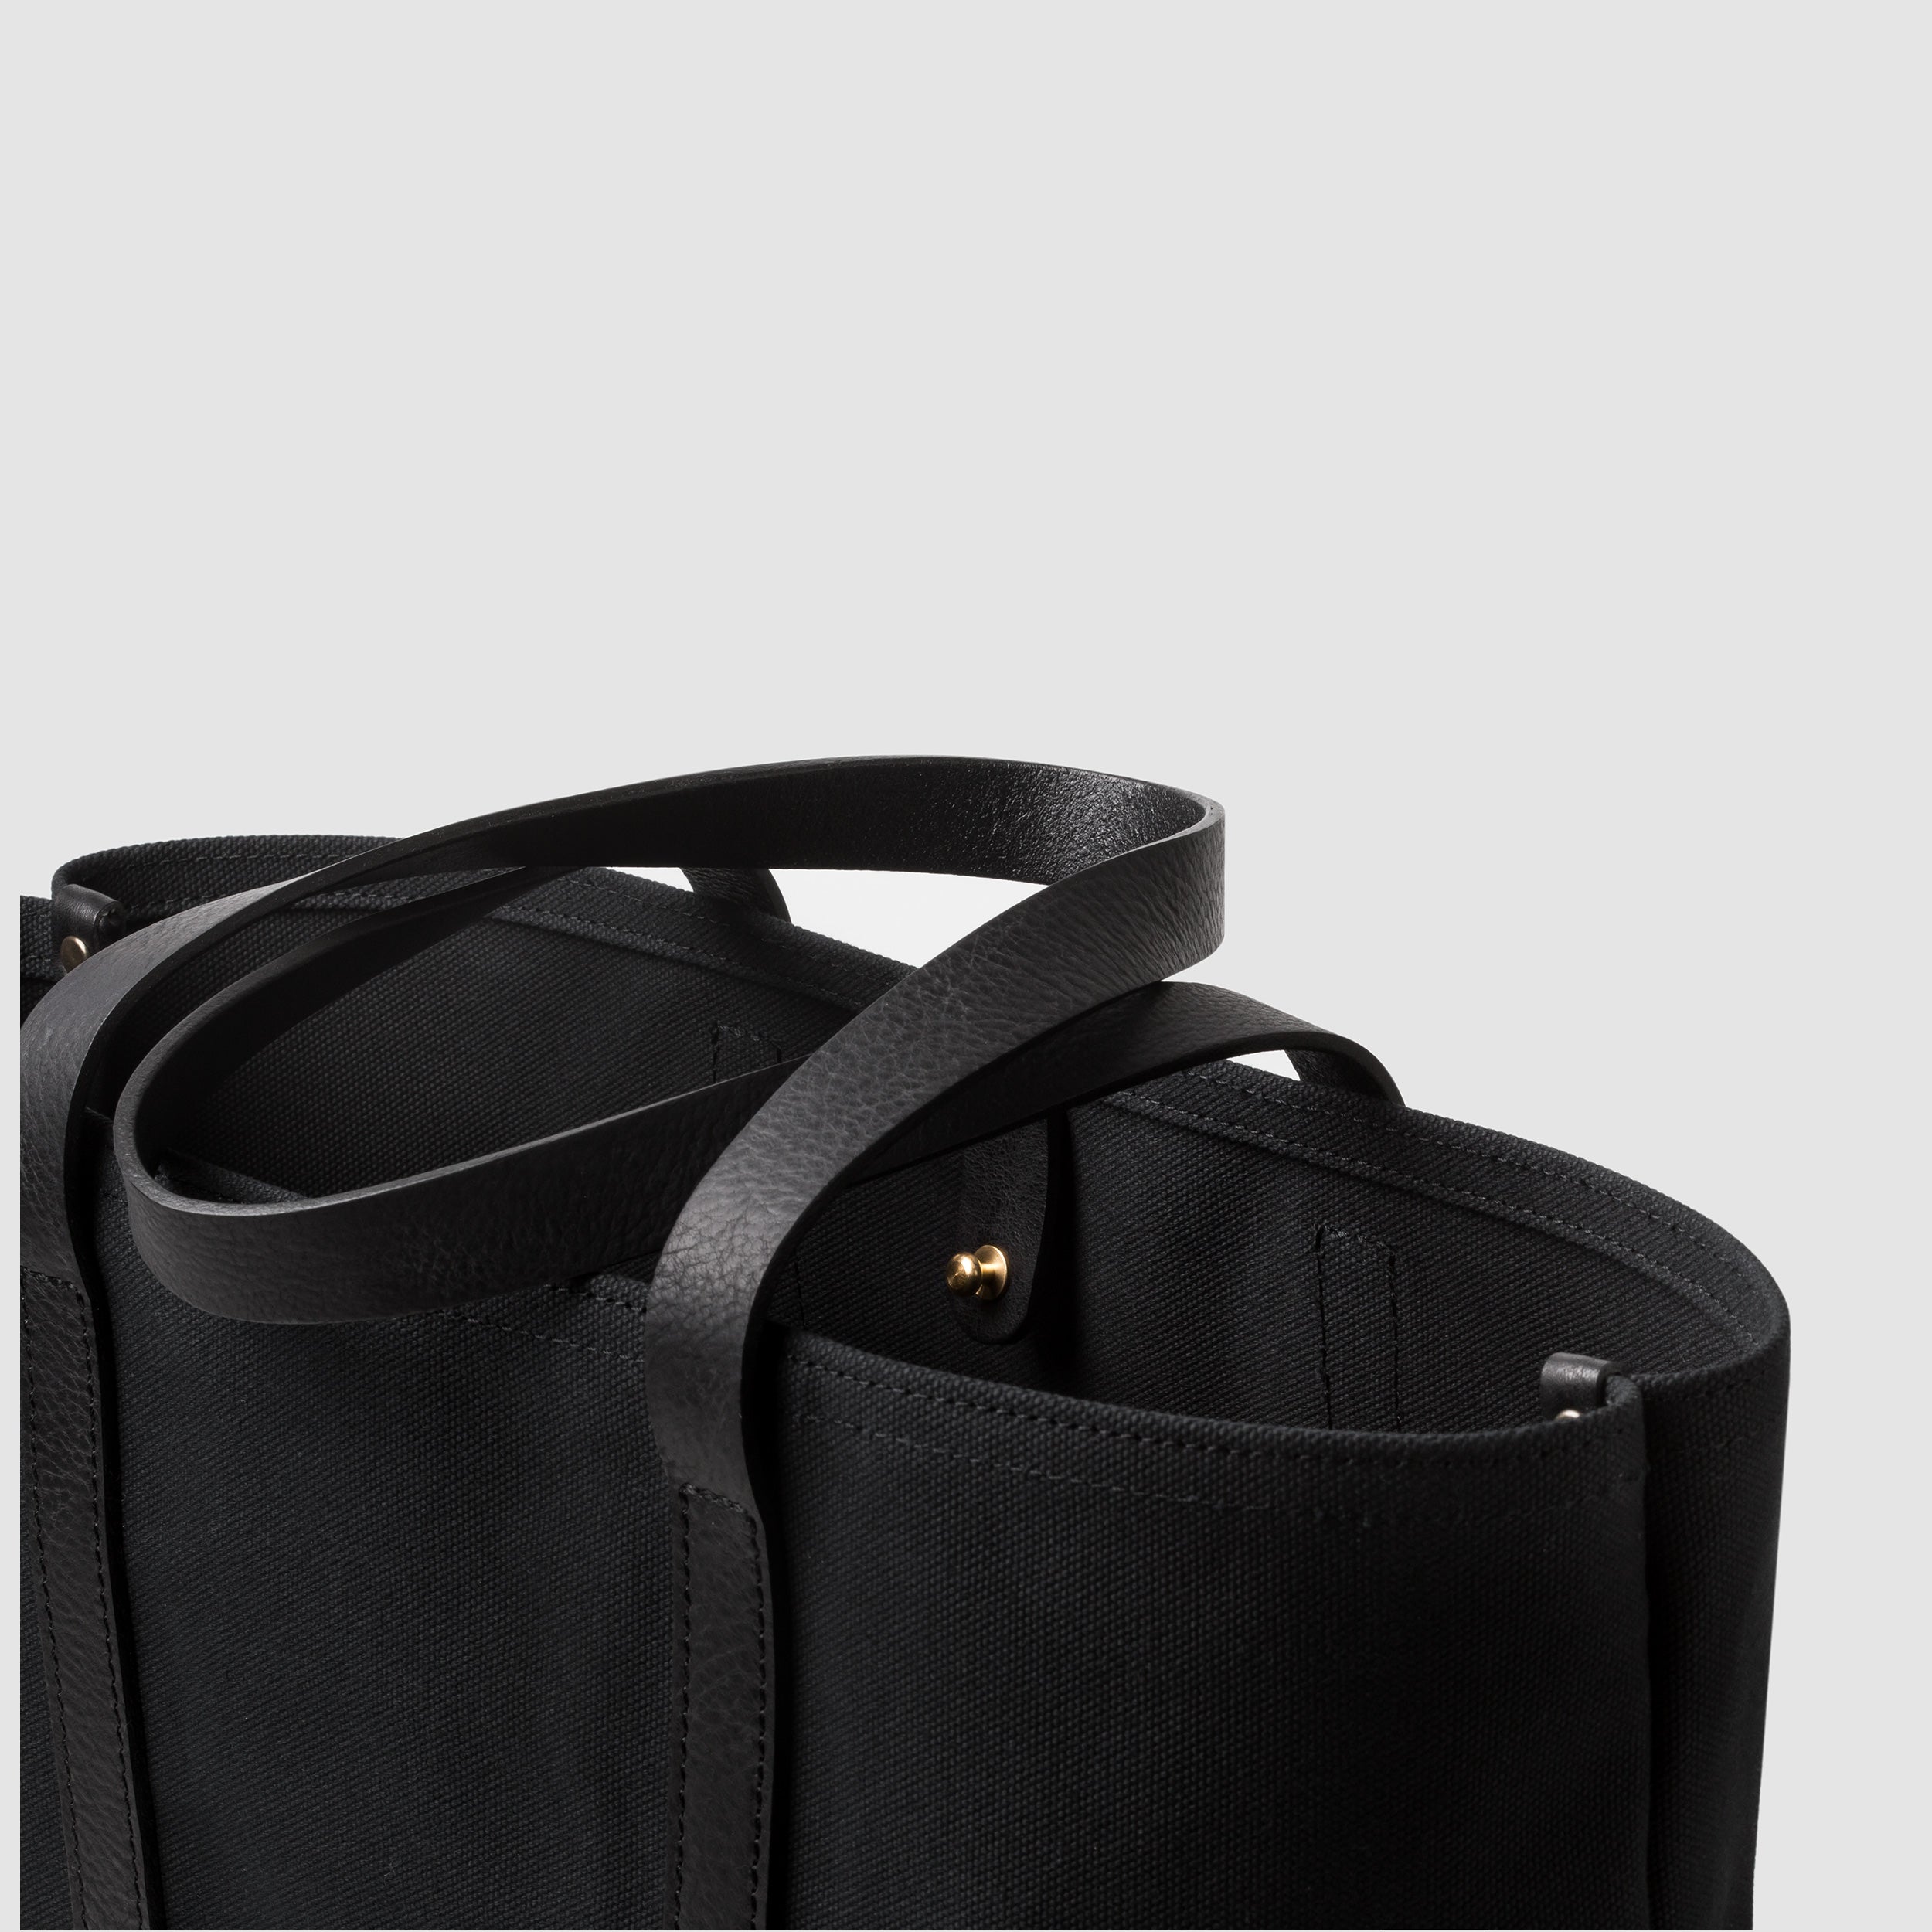 Cano Leather Handle Tote